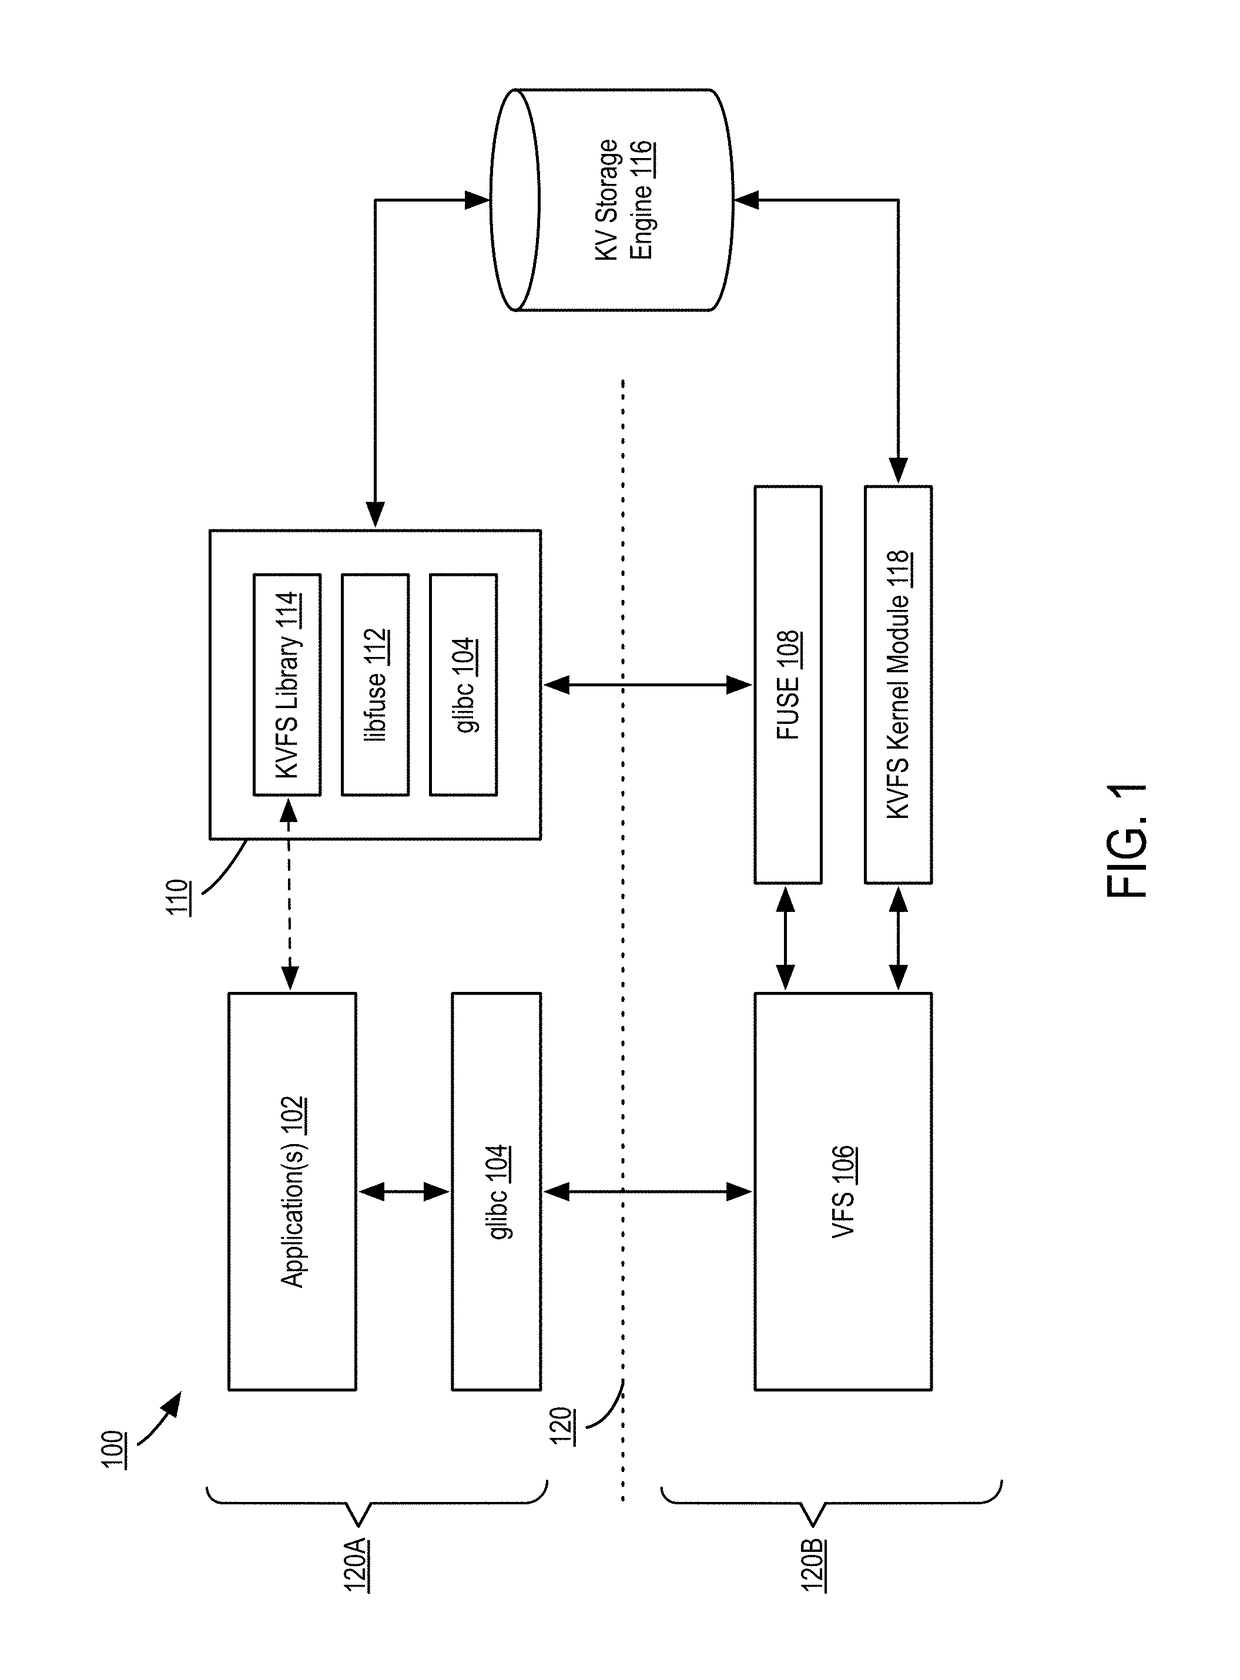 Systems, methods, and apparatuses for simplifying filesystem operations utilizing a key-value storage system